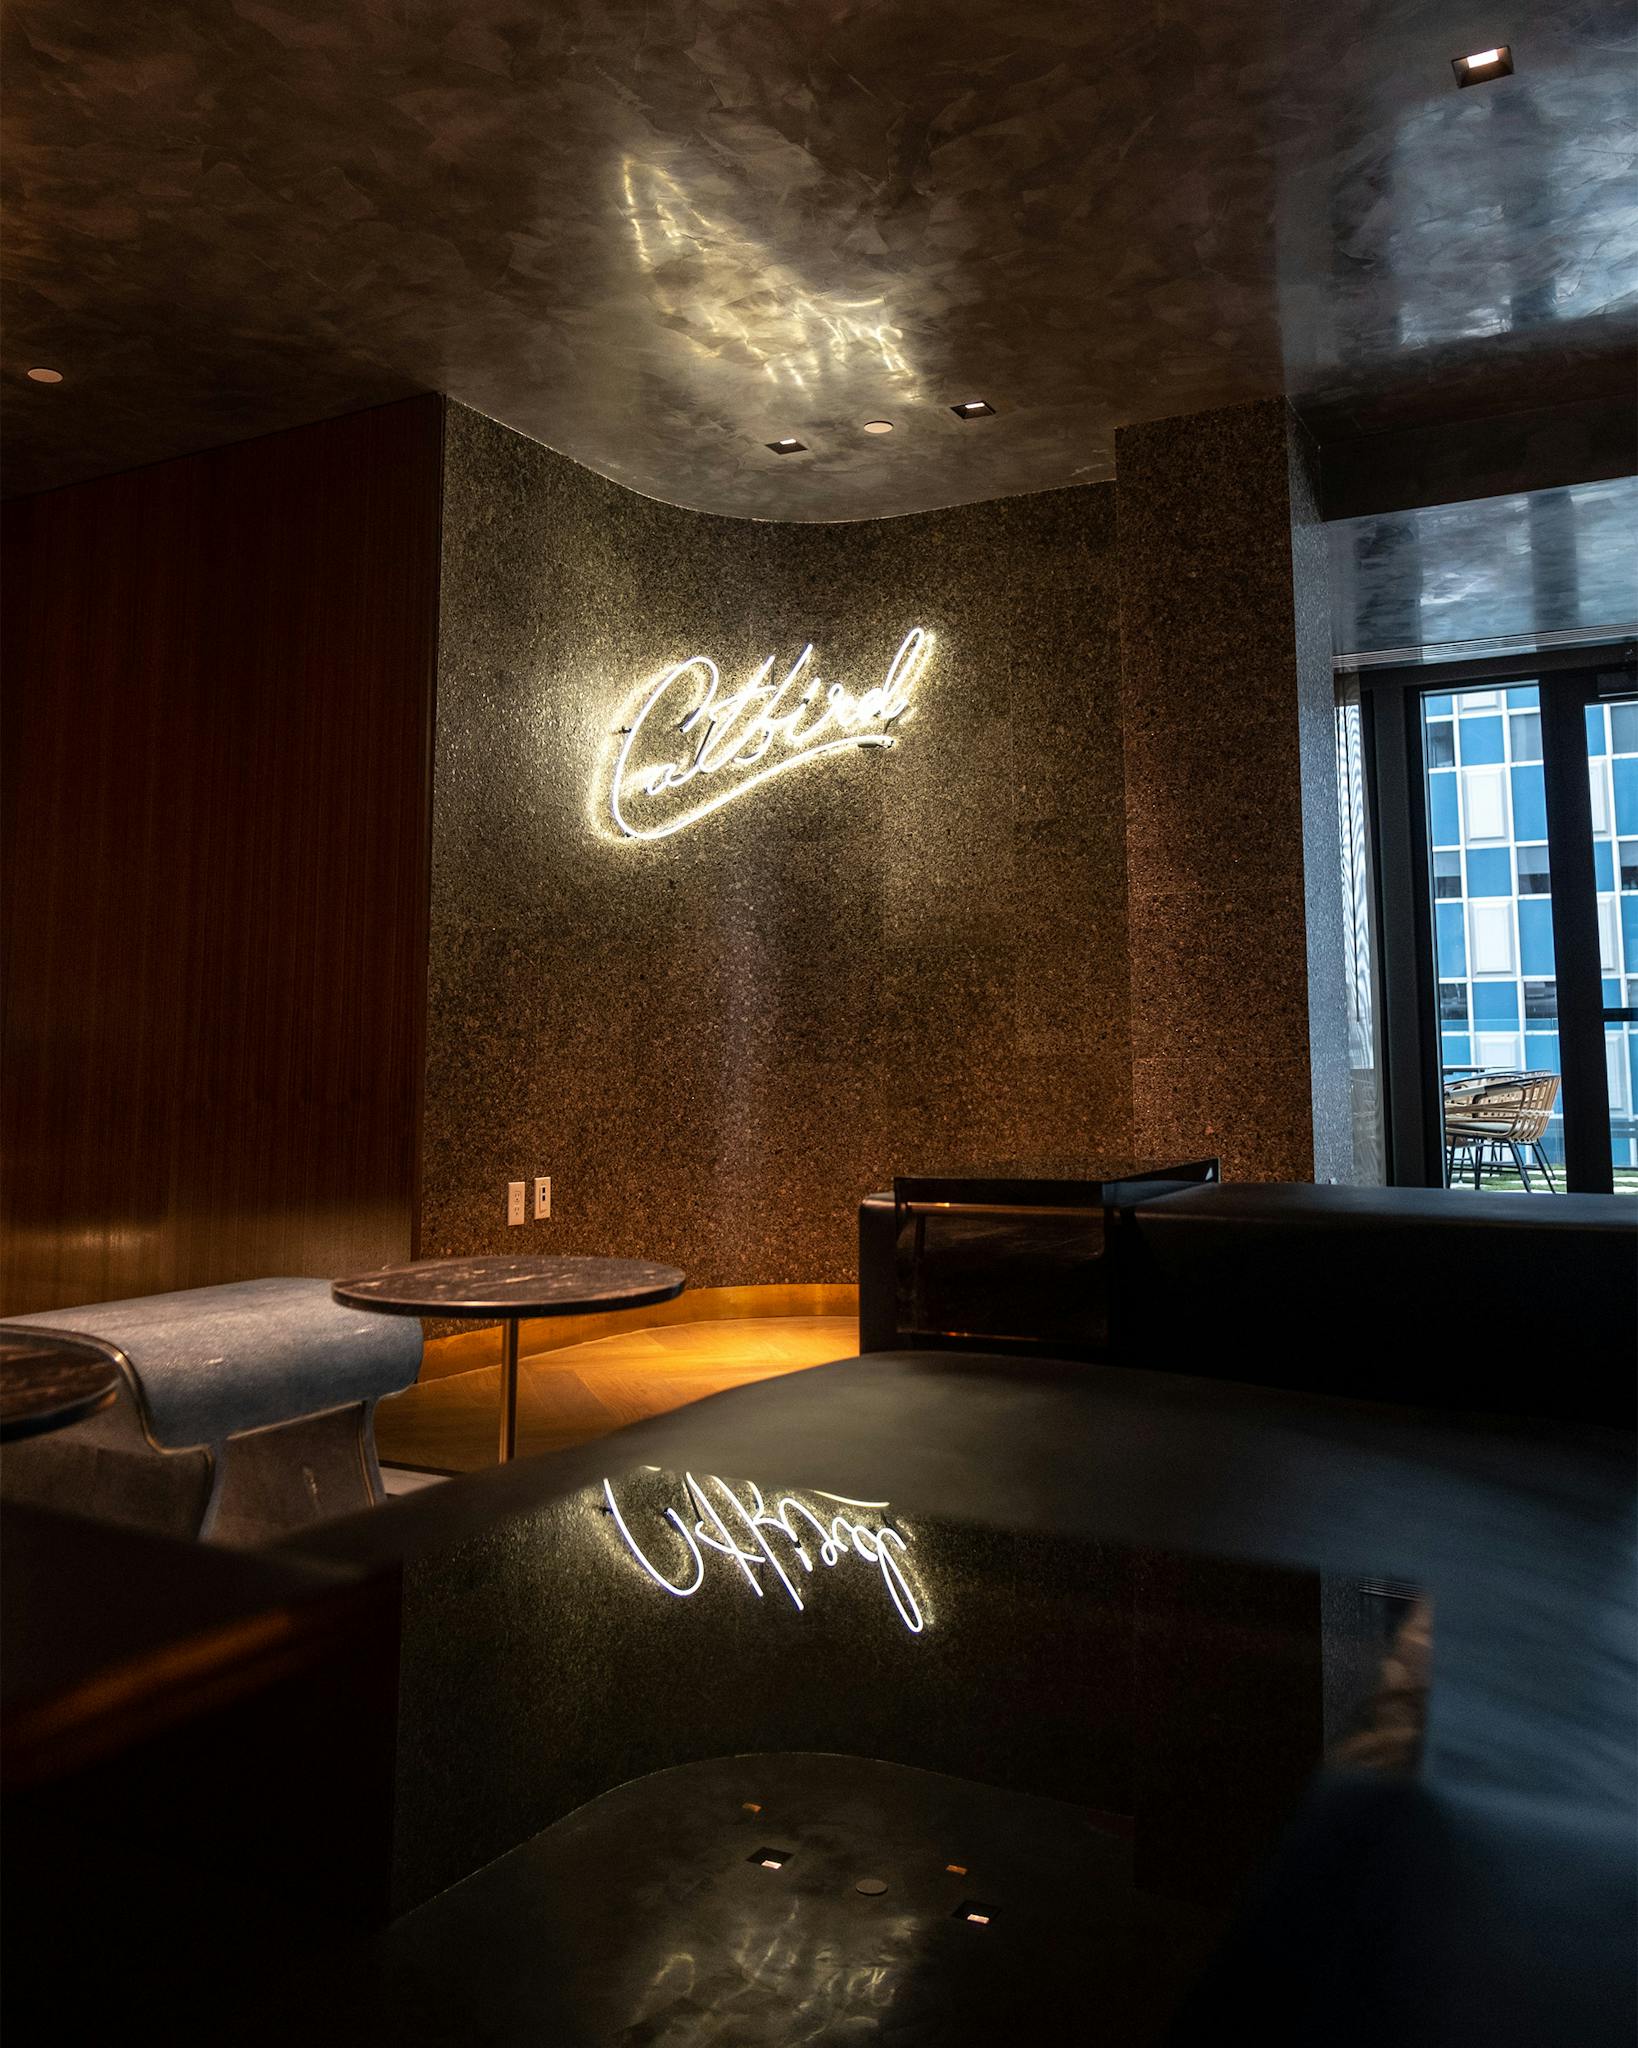 Catbird's light up sign and seating in the Thompson Hotel.